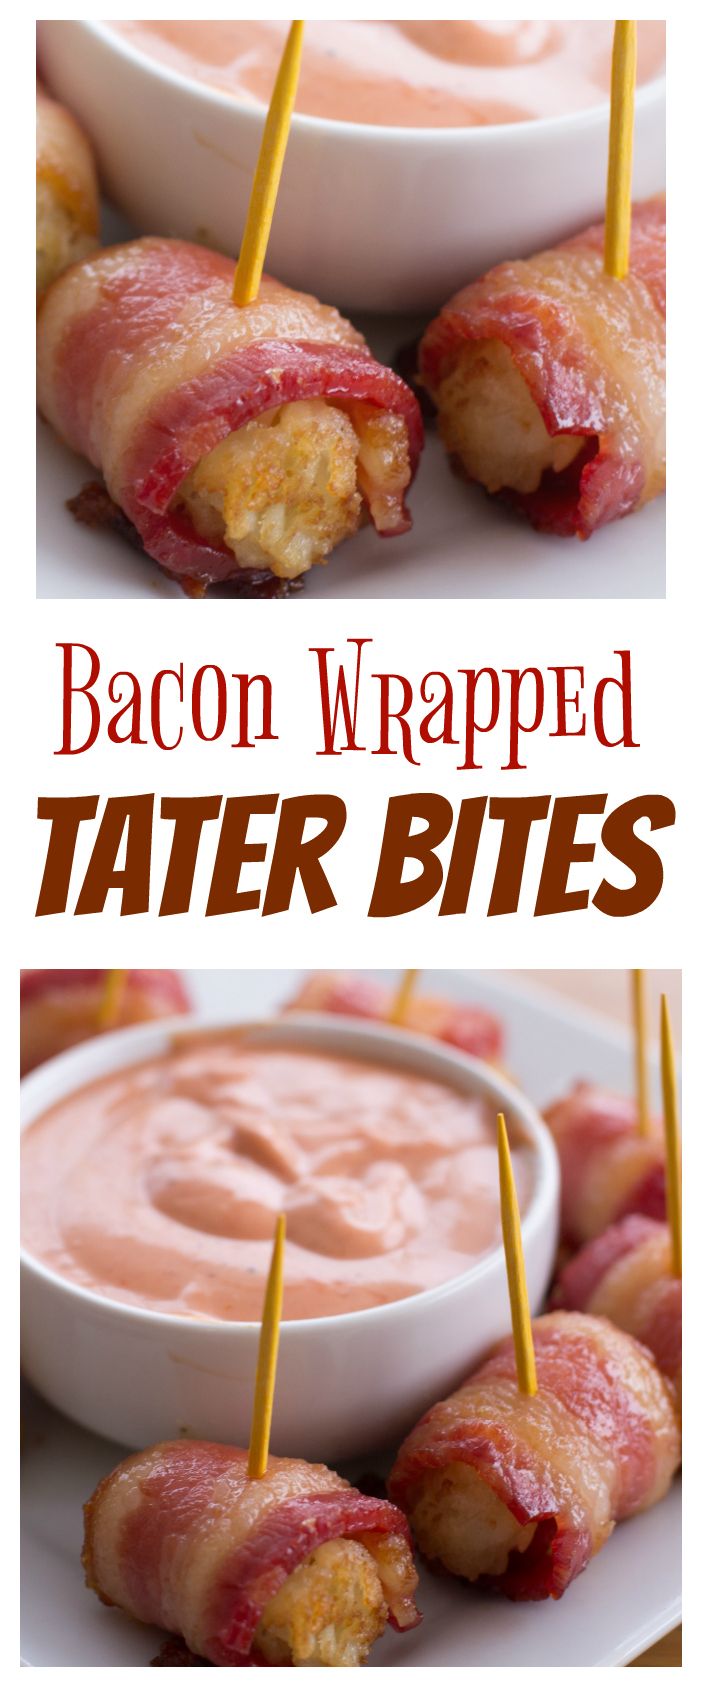 Bacon Wrapped Tater Bites - Sugar n' Spice Gals